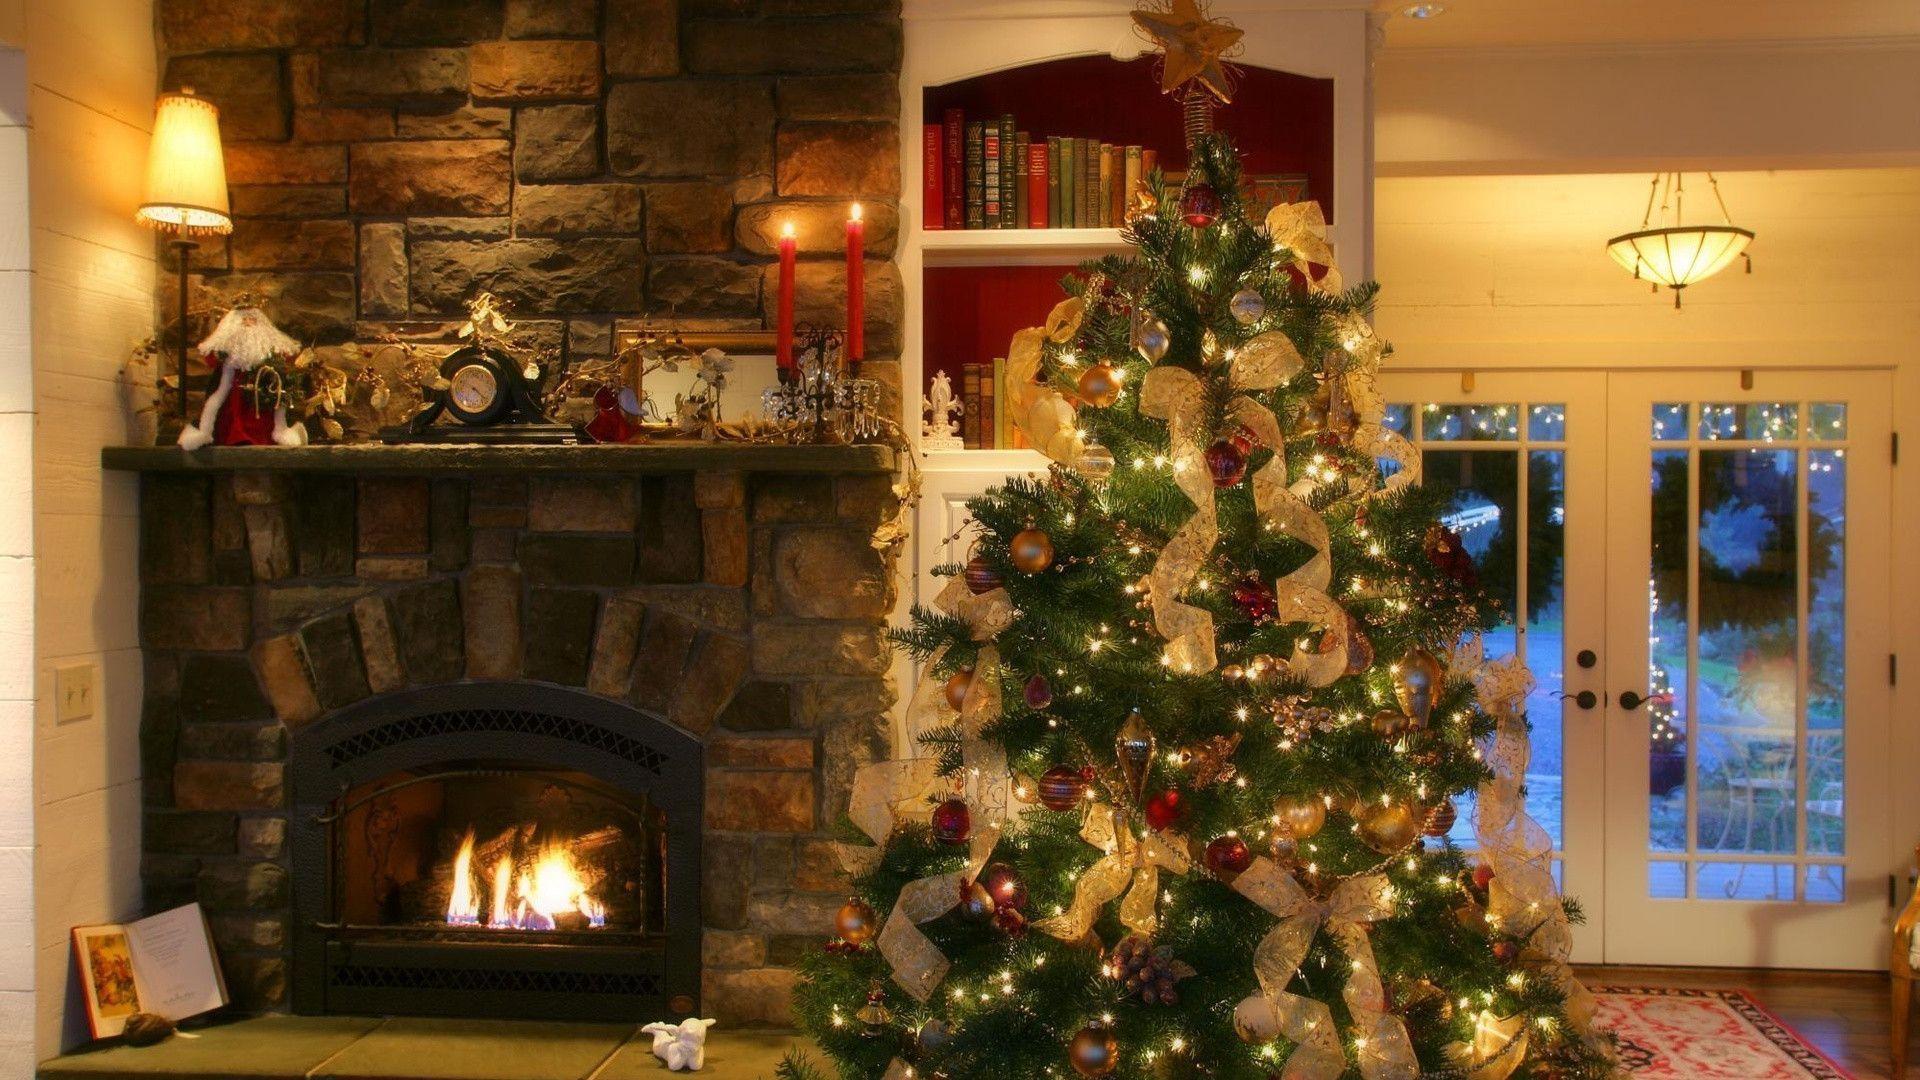 Christmas fireplace picture background wallpaper wallpaper